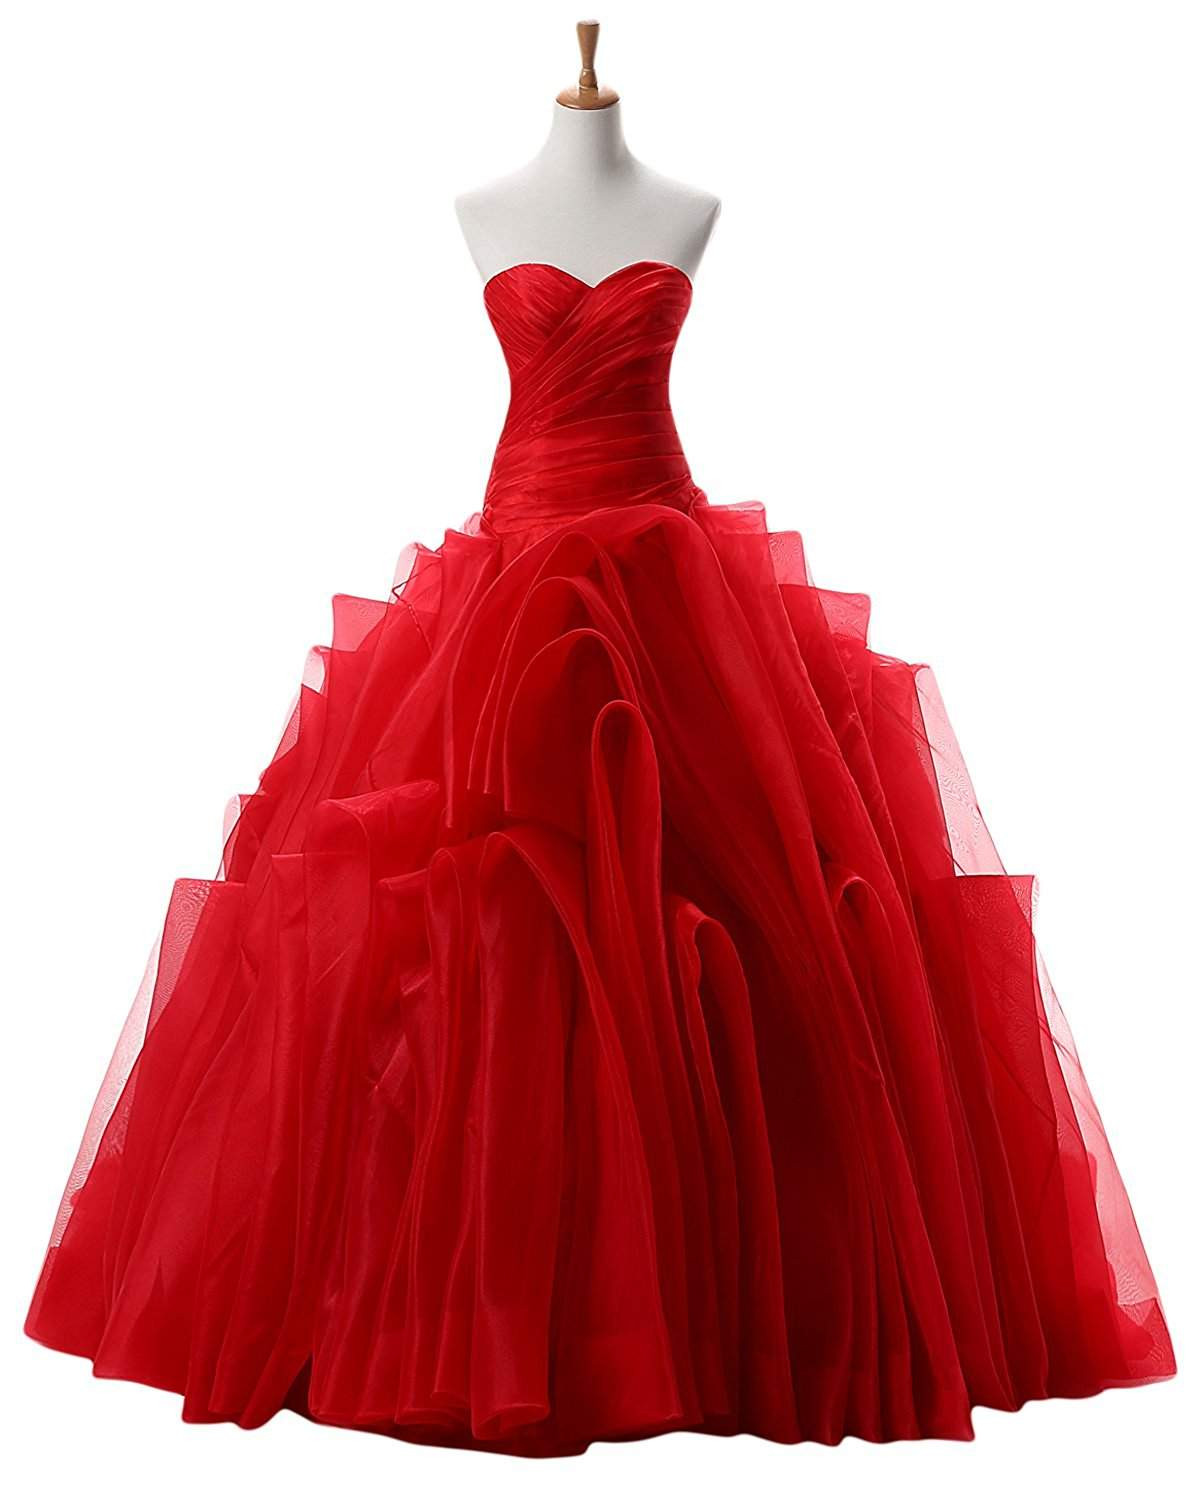 Red Ball Gown Wedding Dresses
 25 Red Wedding Dresses You’ll Absolutely Love 2018